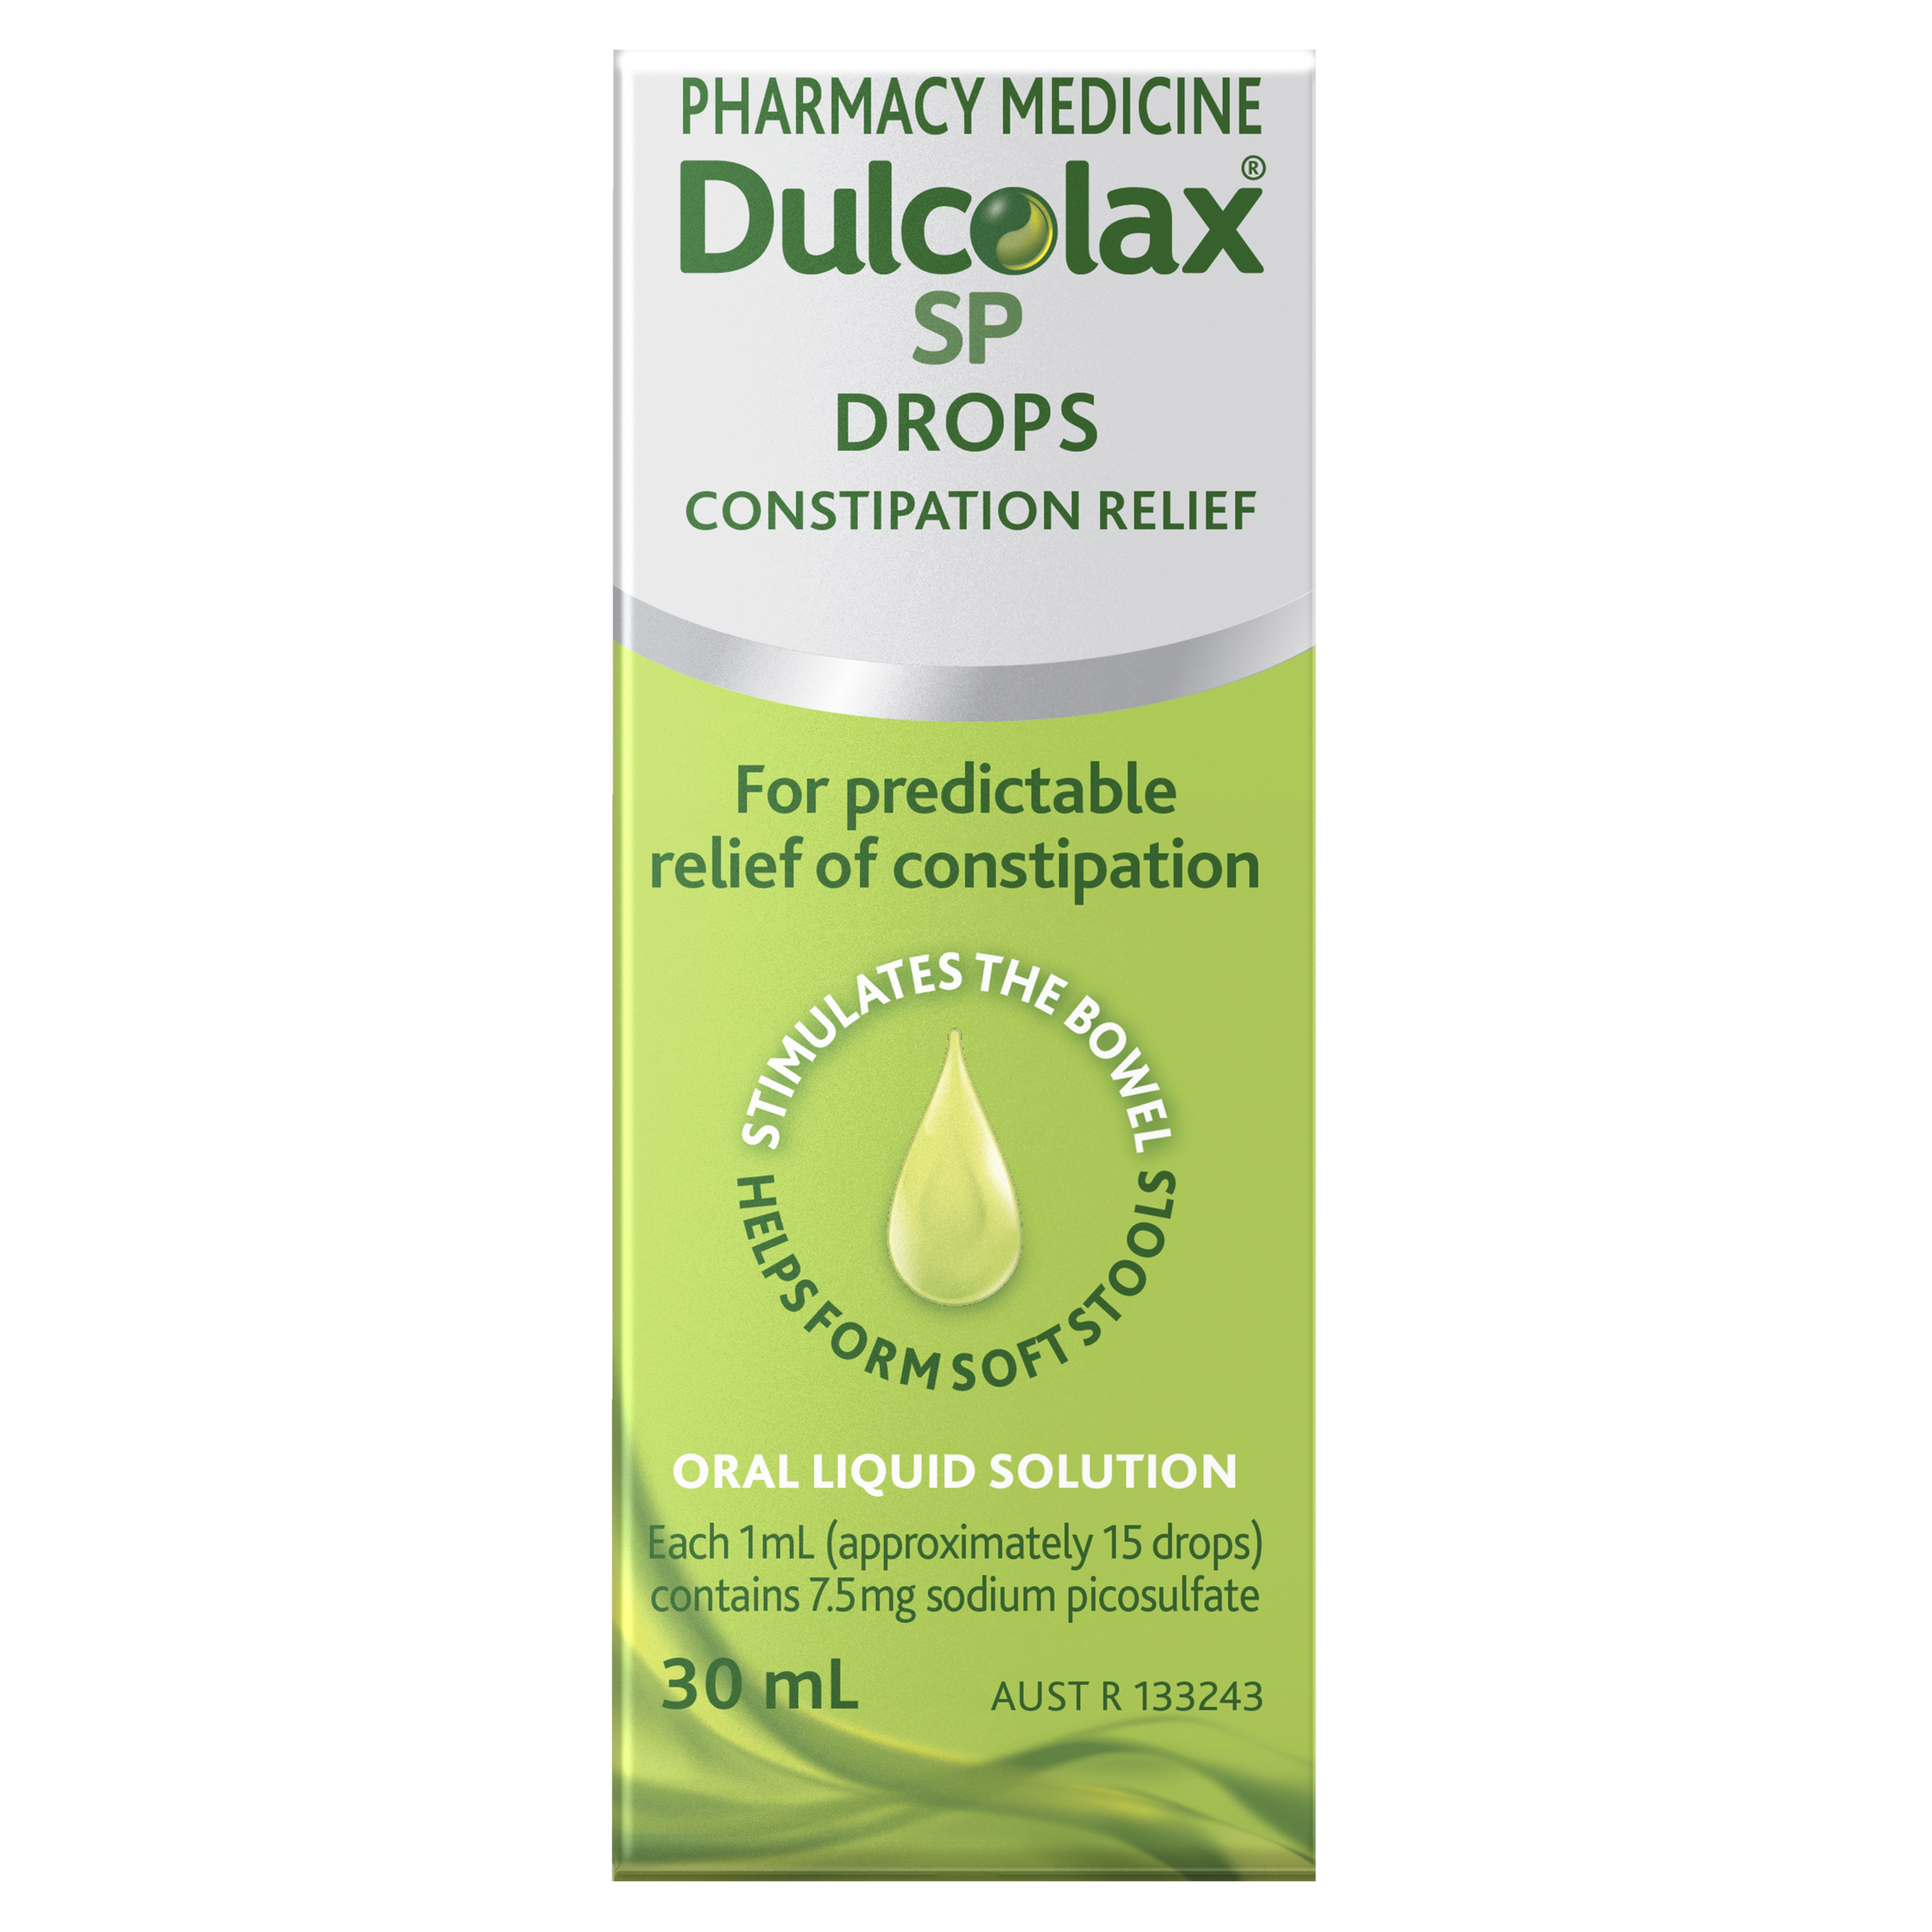 Dulcolax SP Drops Constipation Relief